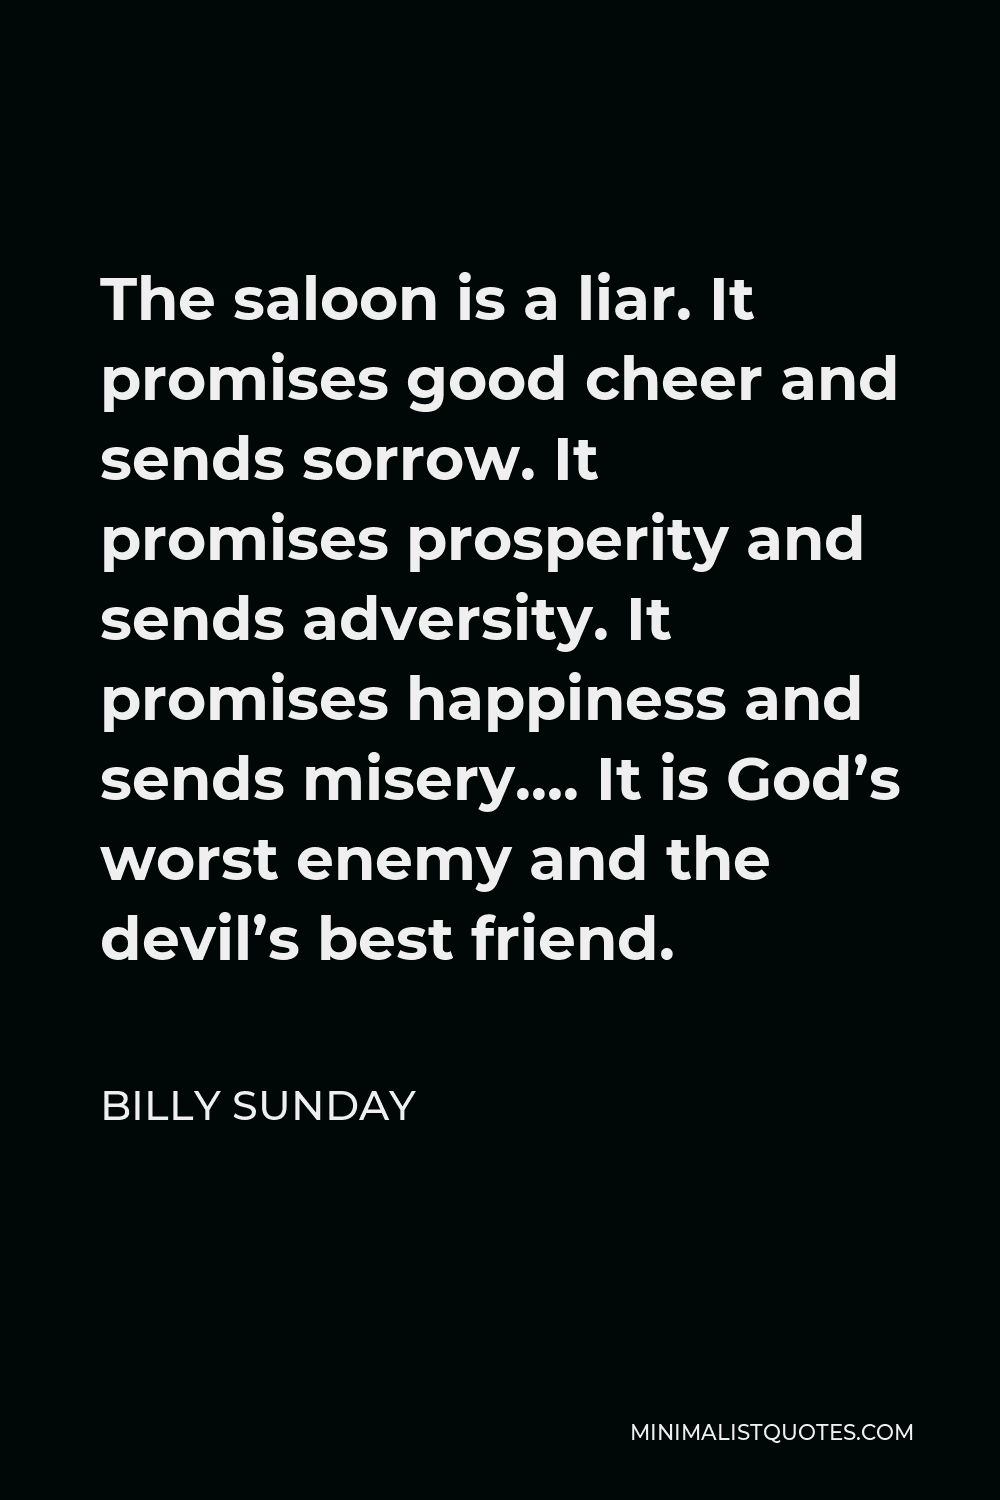 Billy Sunday Quote - The saloon is a liar. It promises good cheer and sends sorrow.